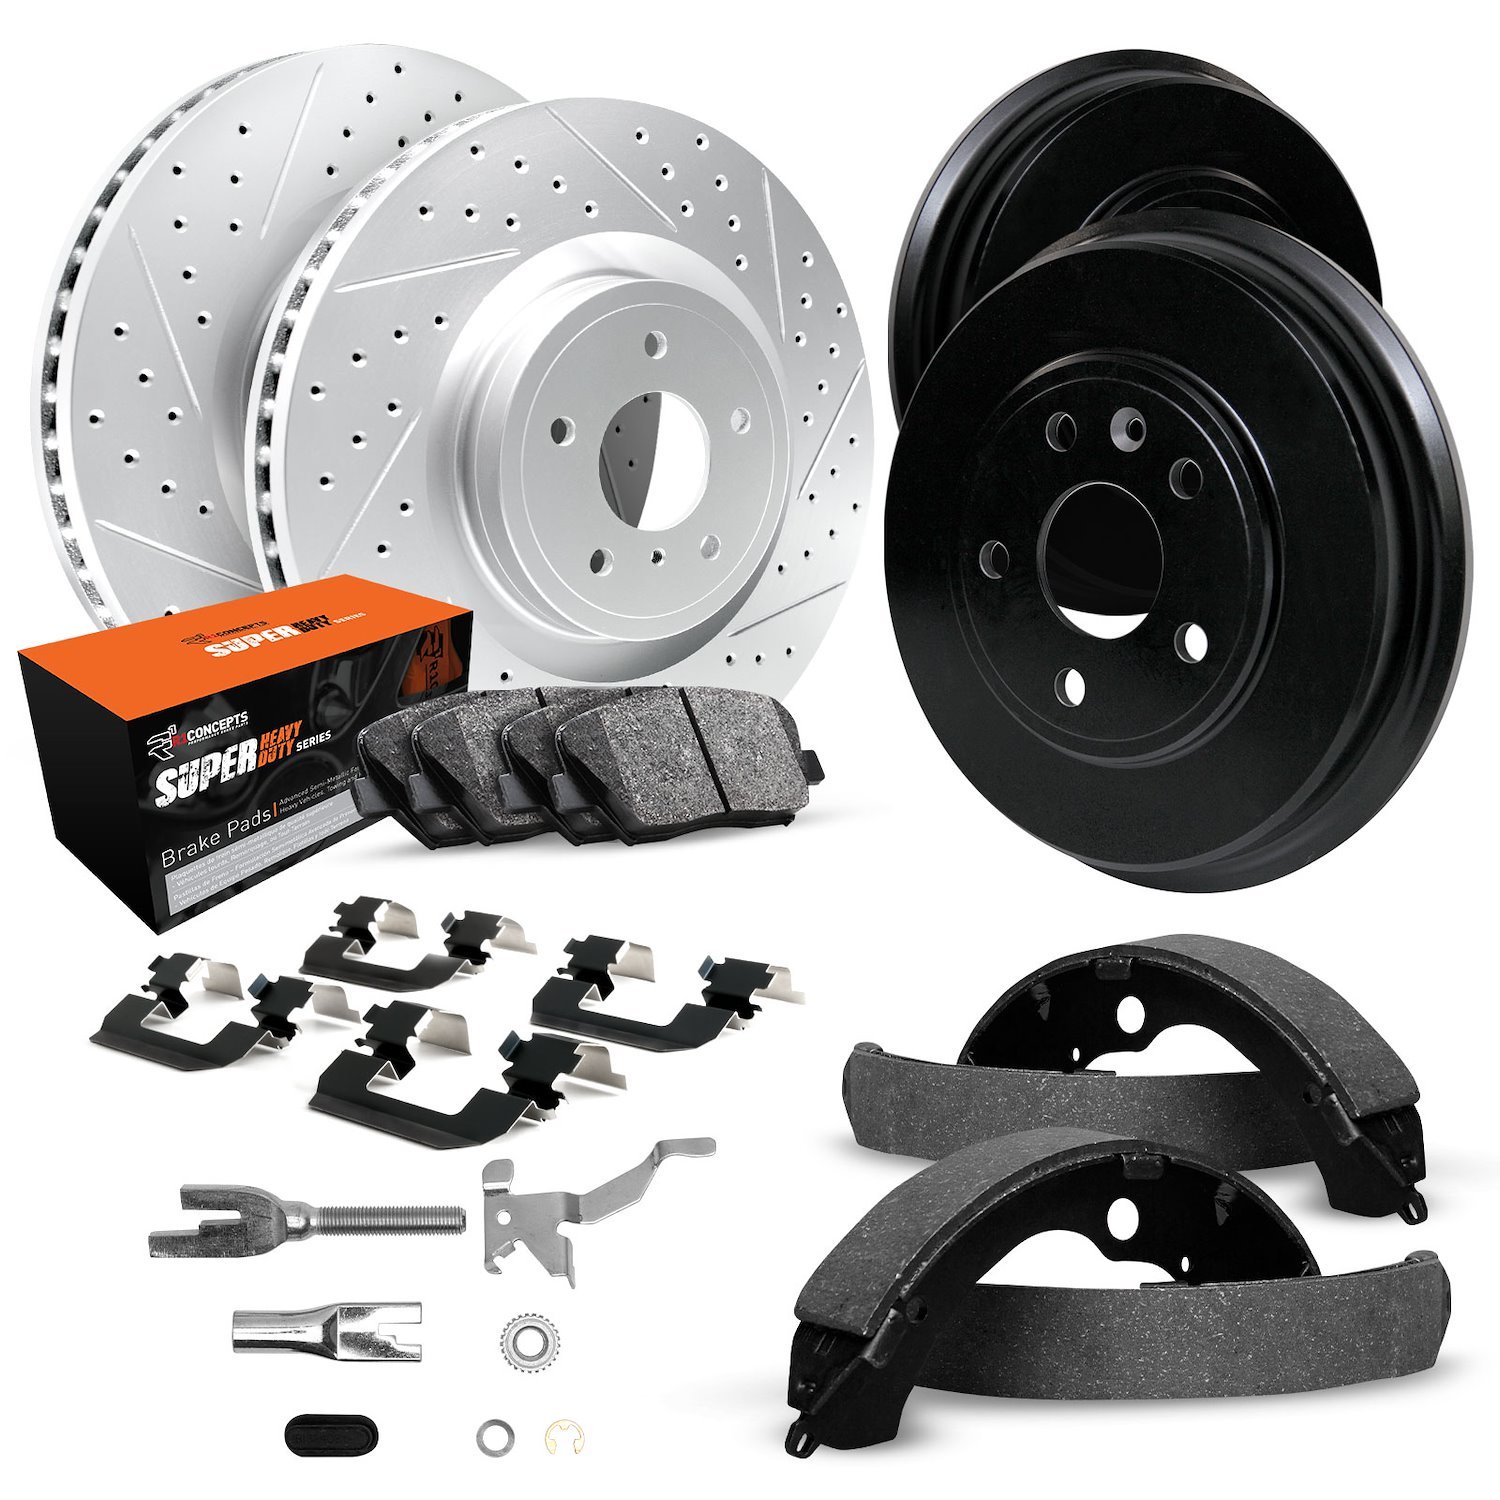 GEO-Carbon Drilled/Slotted Rotors/Drums w/Super-Duty Pads/Shoes/Hardware/Adjusters, 1998-2000 GM, Position: Front/Rear